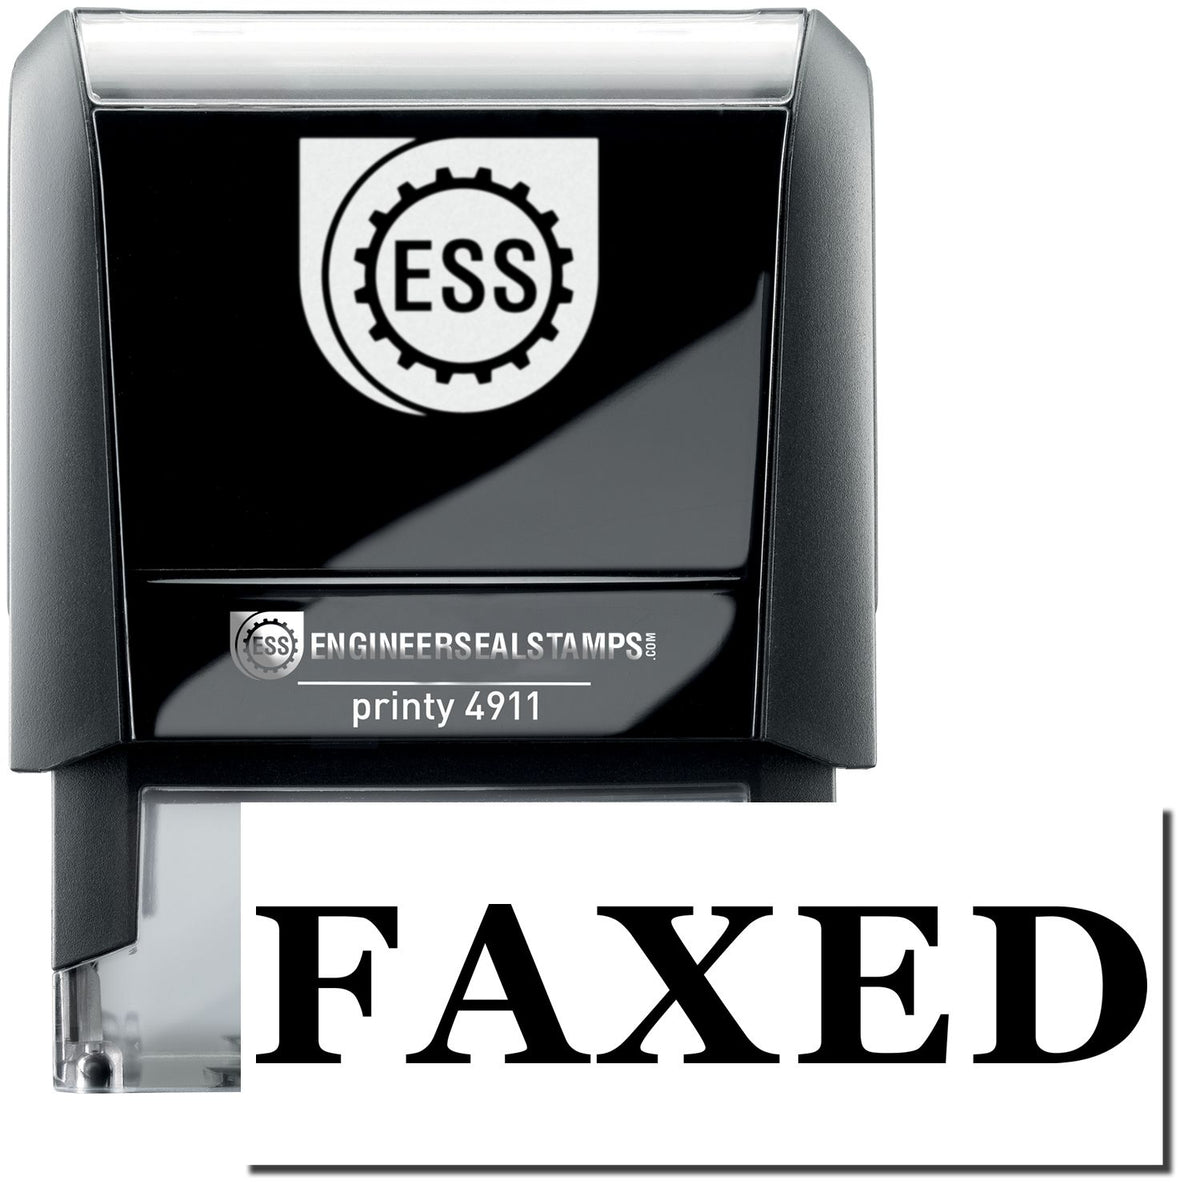 A self-inking stamp with a stamped image showing how the text &quot;FAXED&quot; in a times font is displayed after stamping.